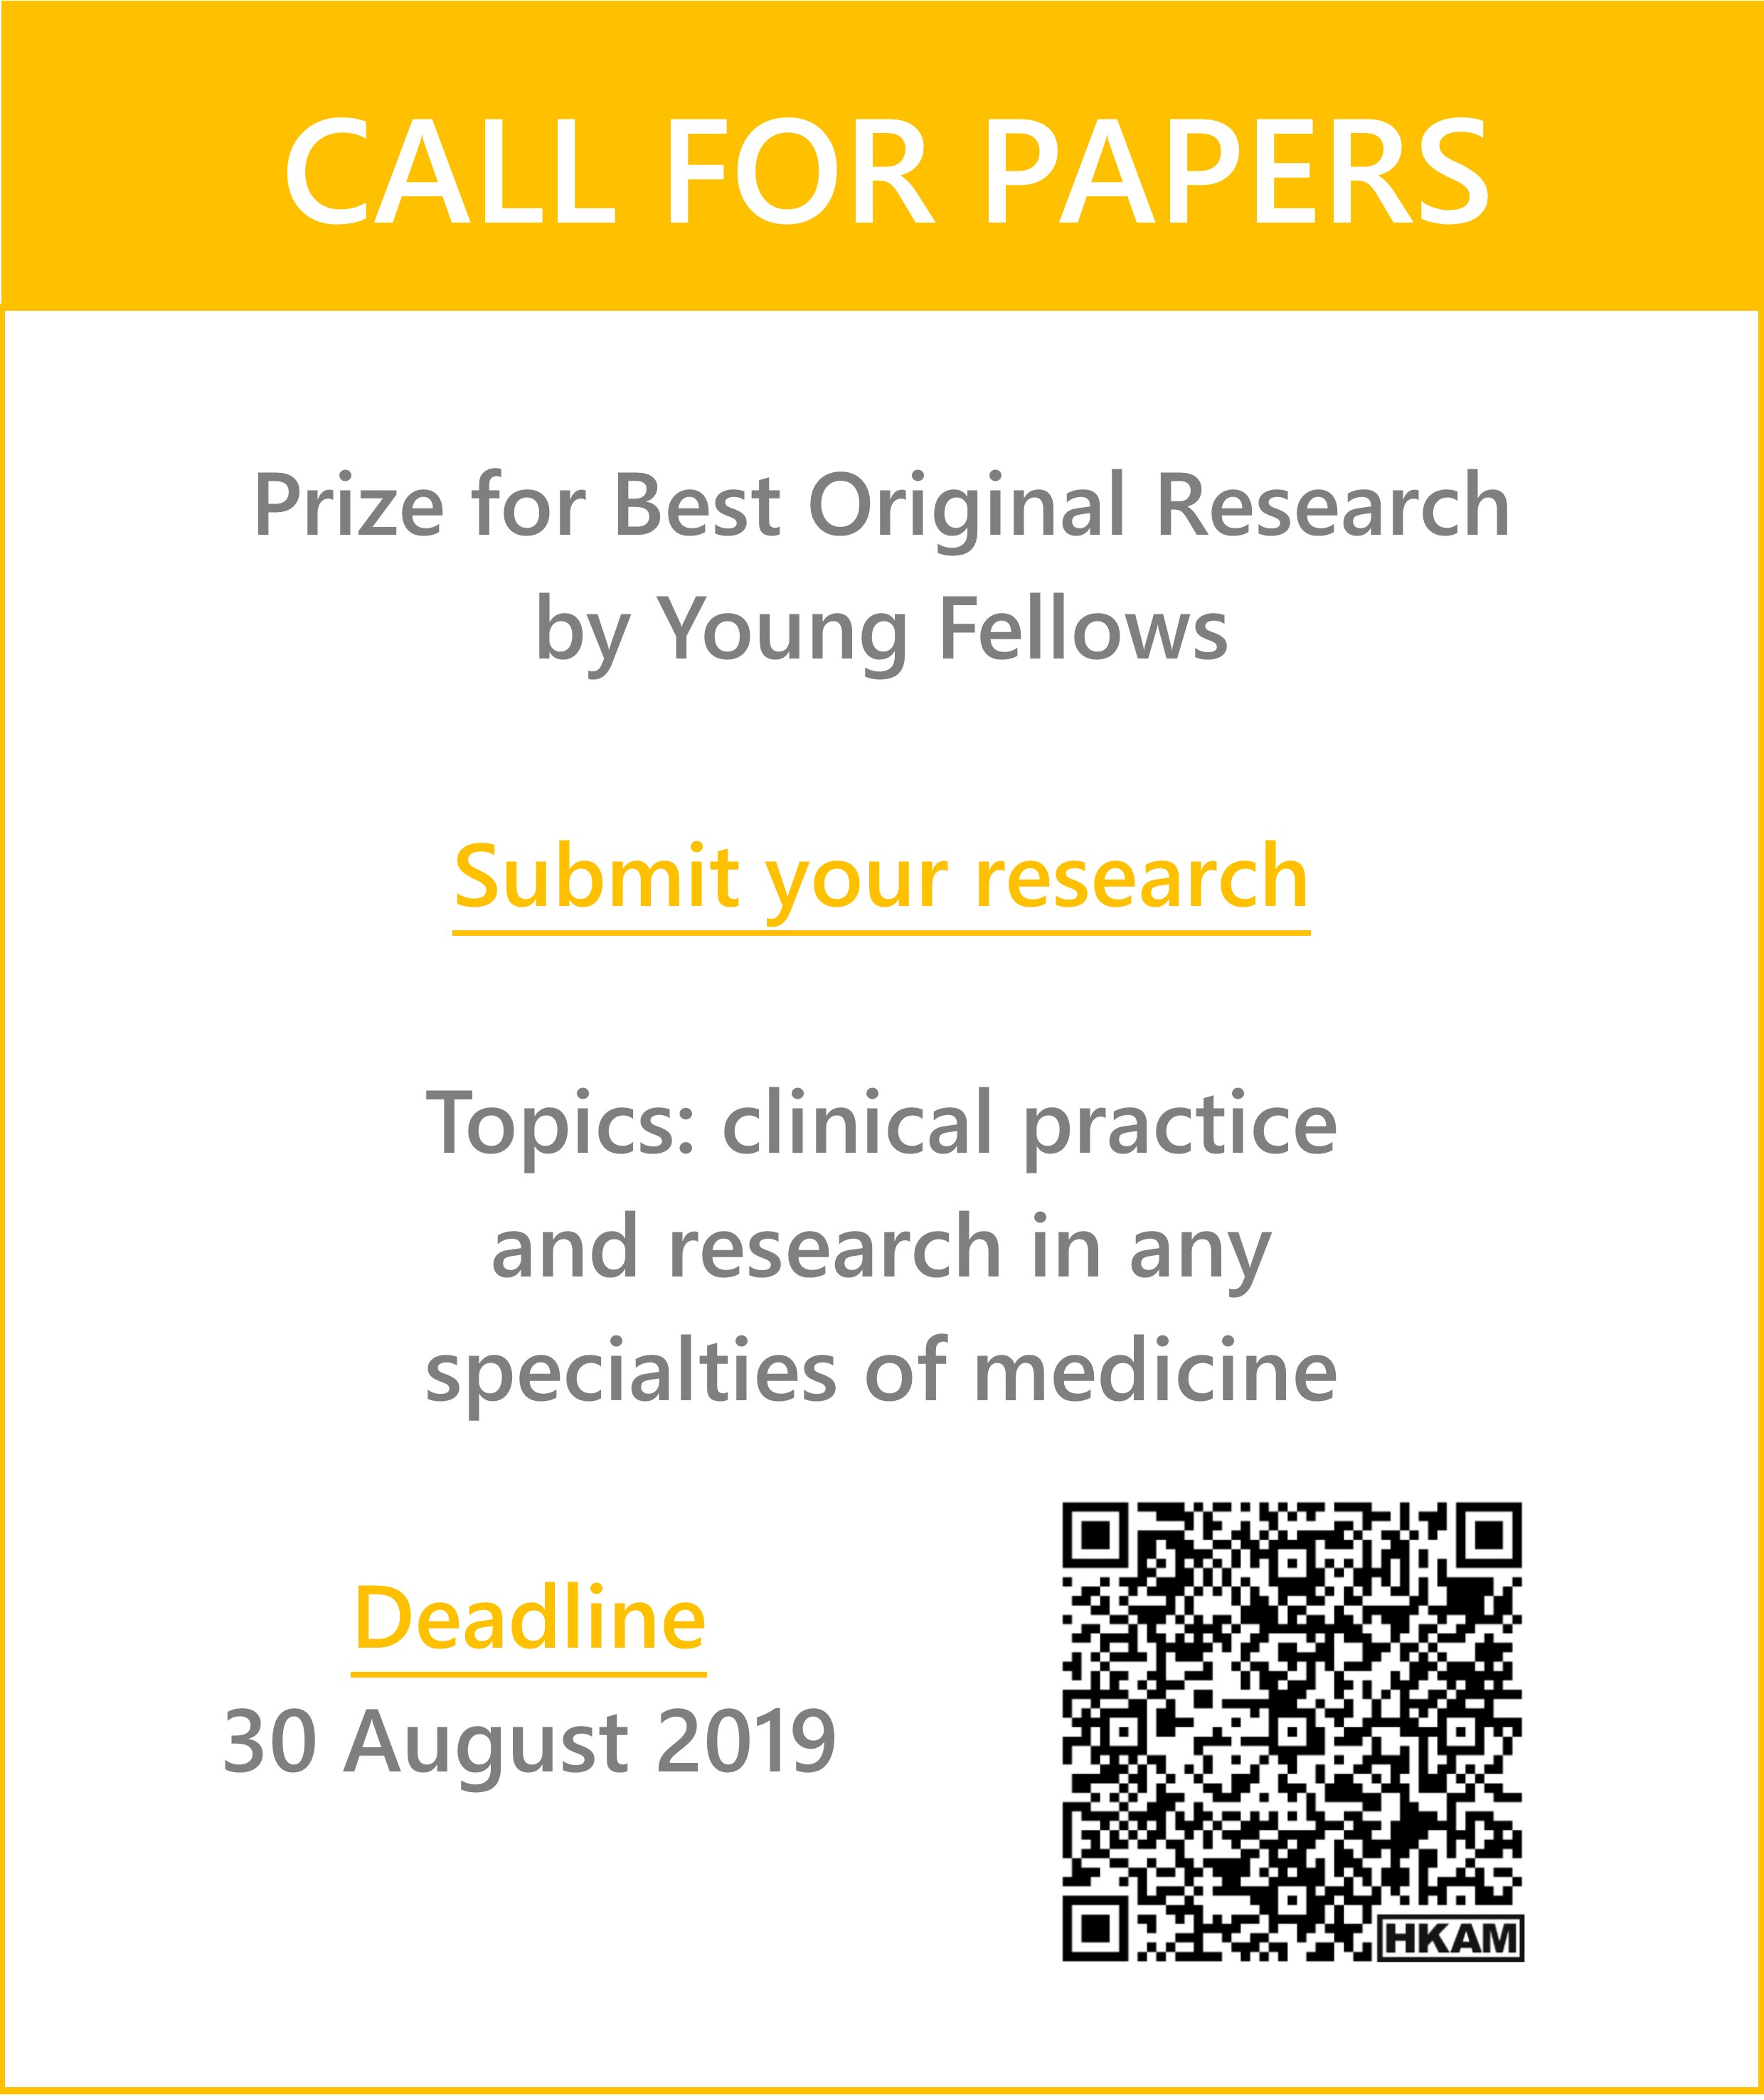 Call for Papers: Prize for Best Original Research by Young Fellows